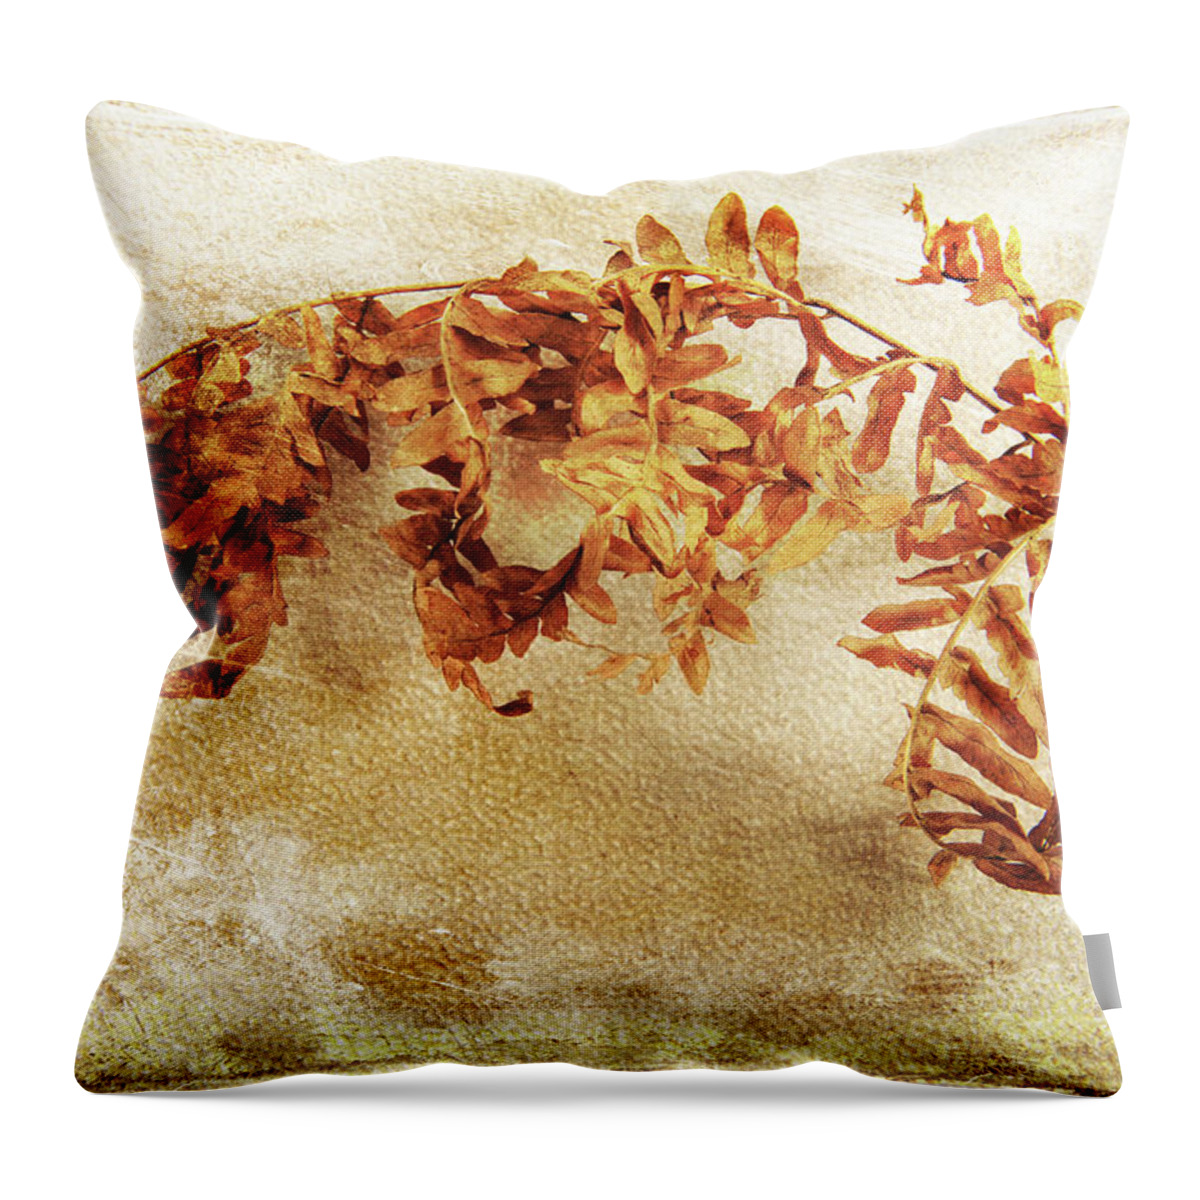 Old Throw Pillow featuring the photograph Disorderly Order by Randi Grace Nilsberg